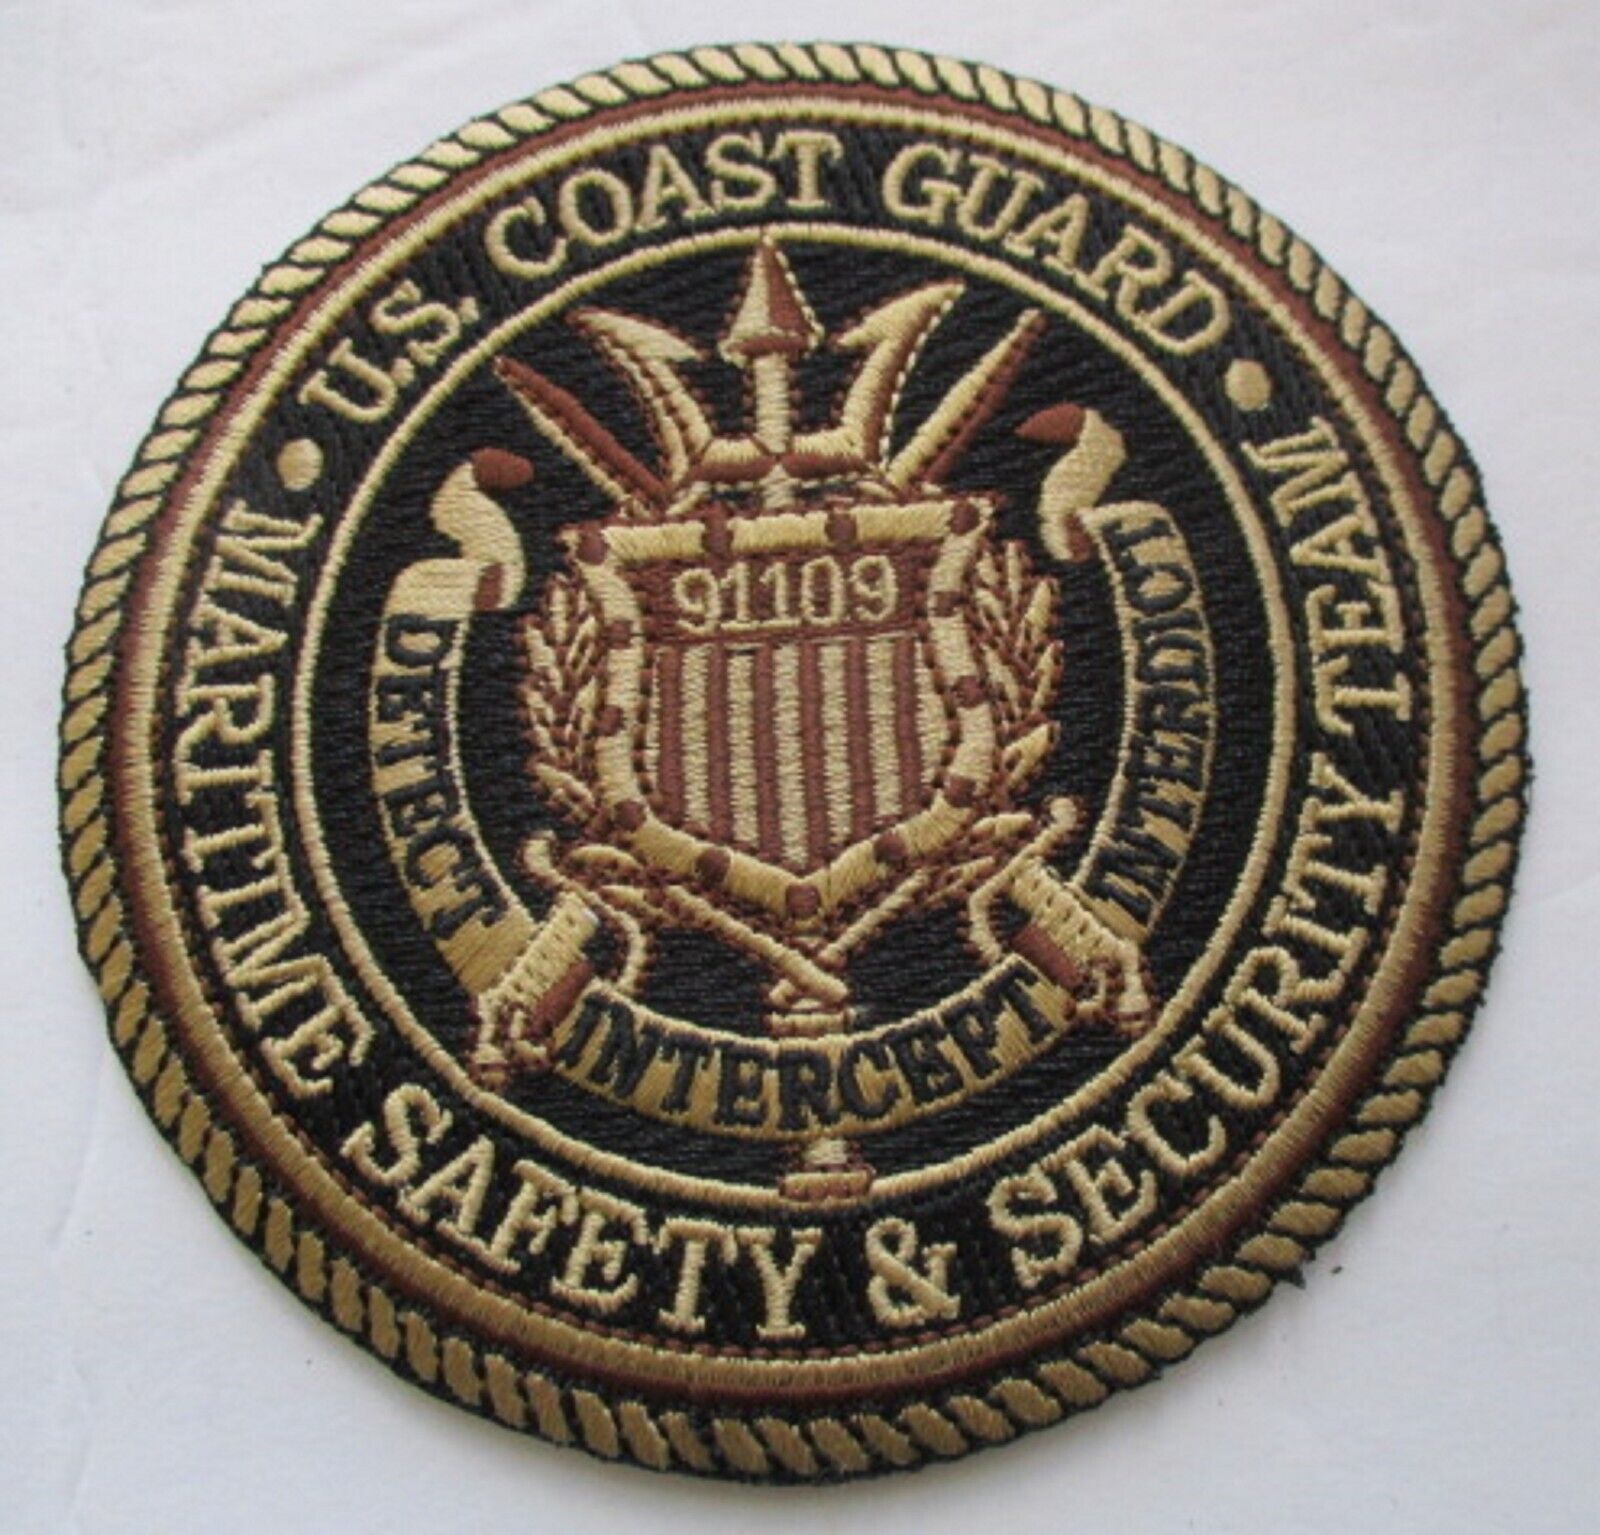 US COAST GUARD MARITIME SAFETY & SECURITY TEAM S1109 PATCH